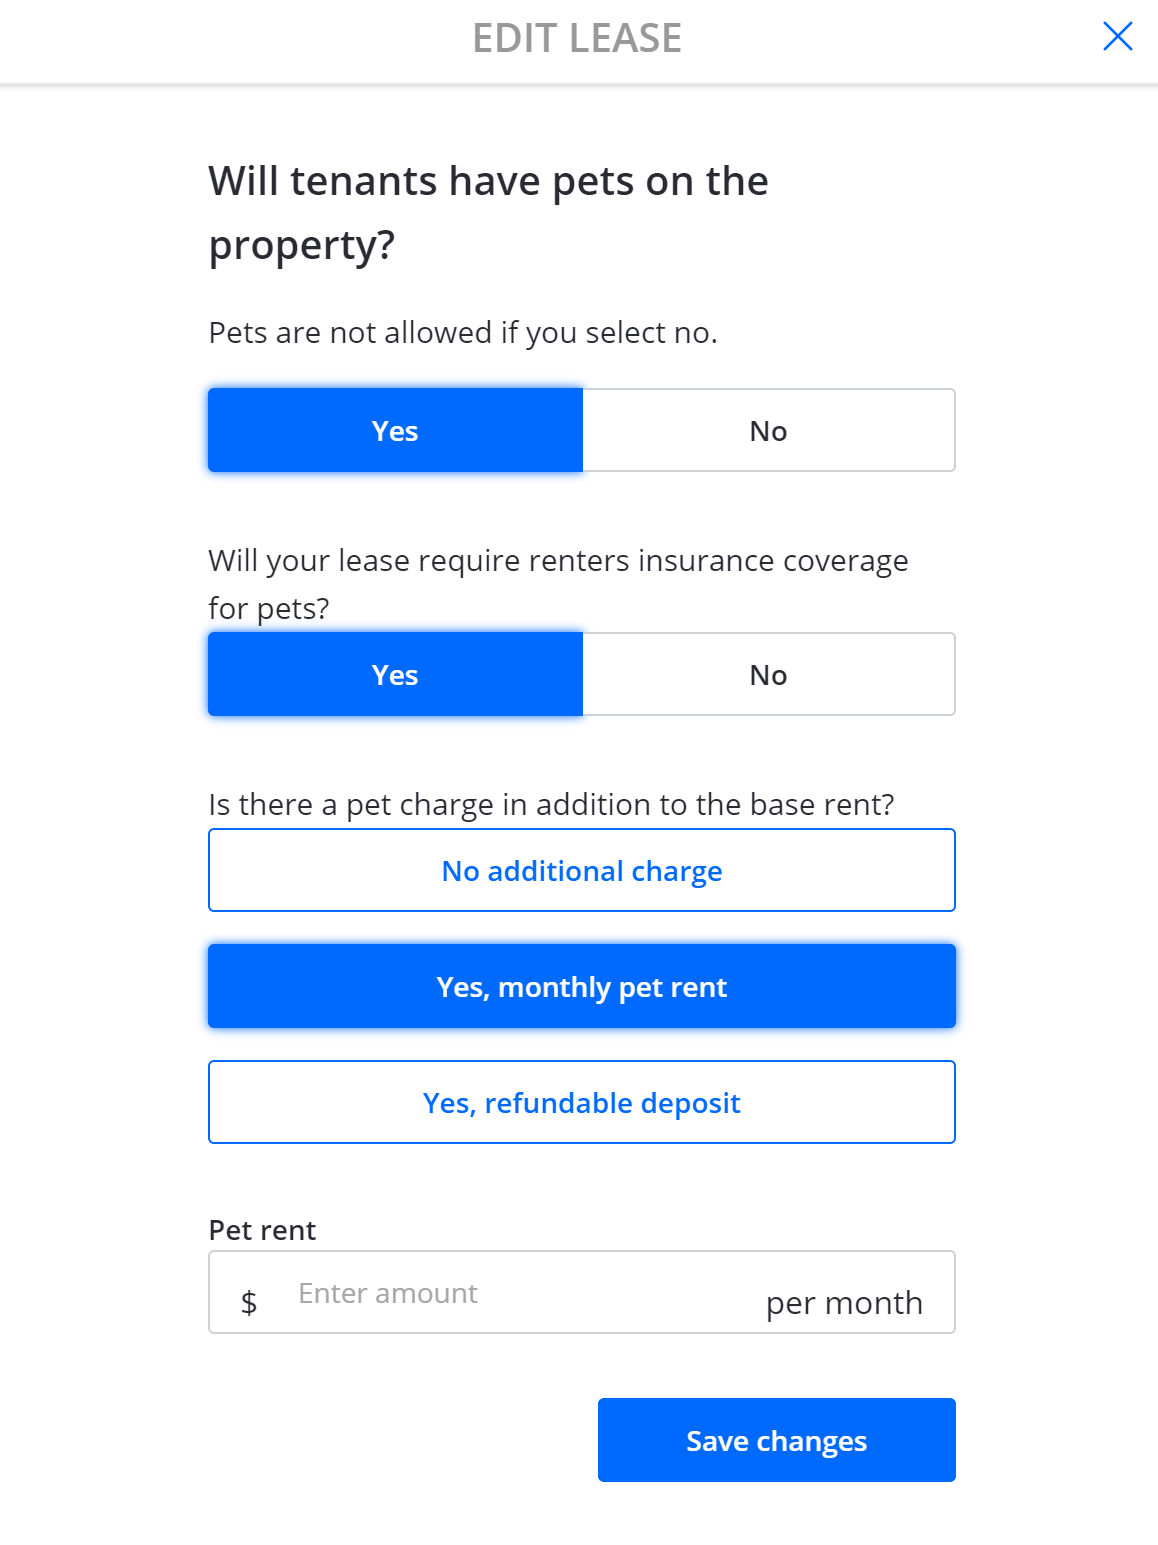 An example of adding pet rent and a refundable pet deposit to a lease.